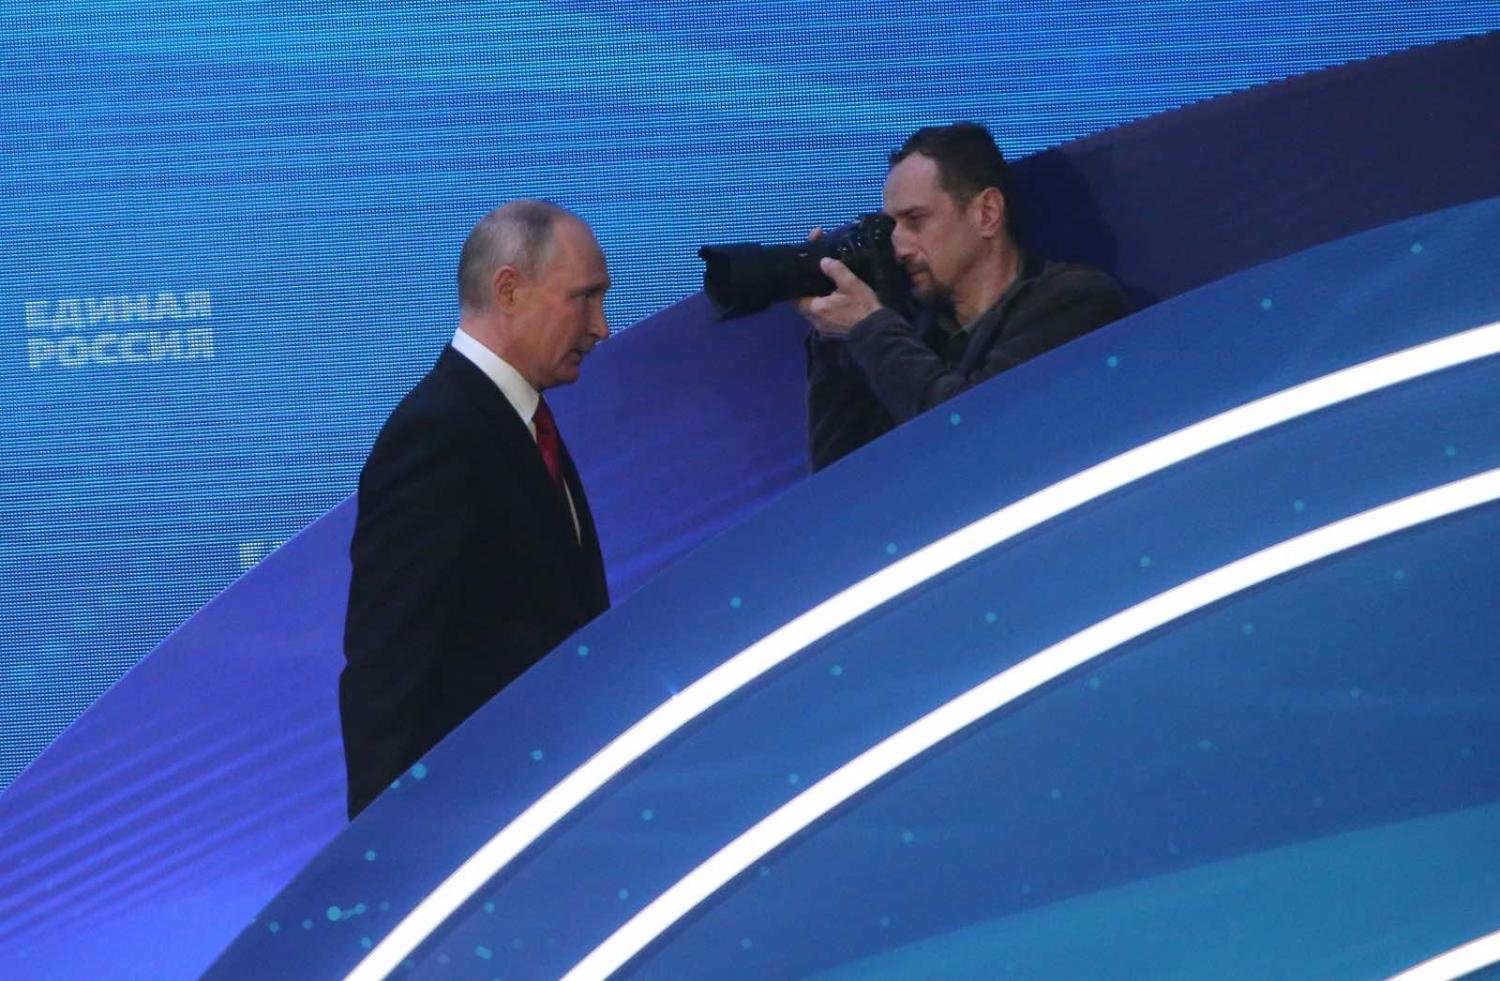 Russian President Vladimir Putin leaves after a speech at the 20th Congress of the United Russia Party in Moscow, 19 June 2021 (Mikhail Svetlov/Getty Images)